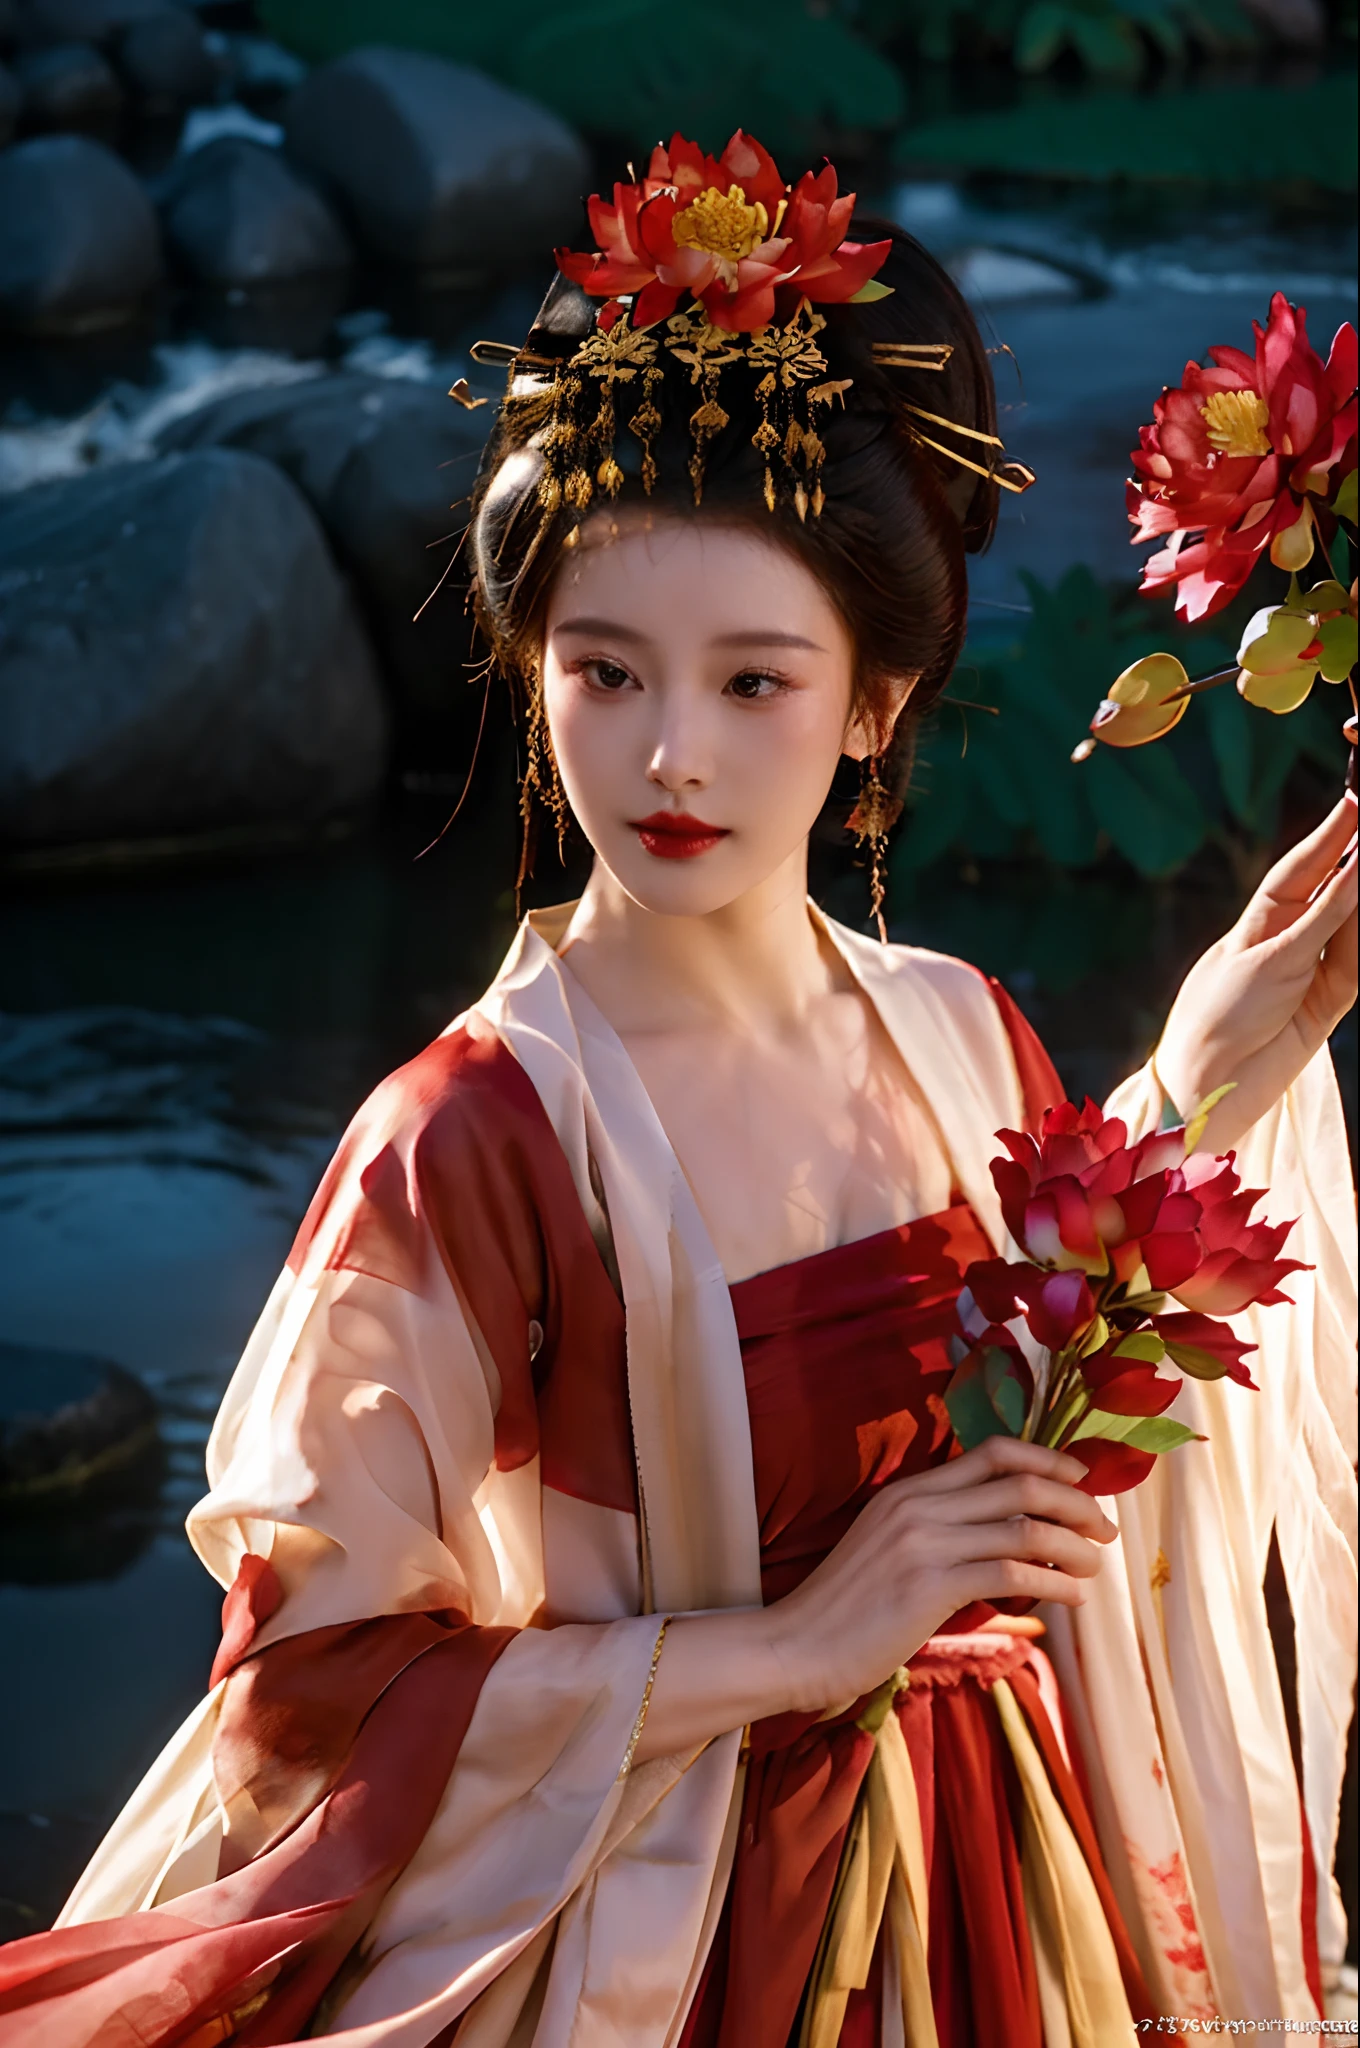 zanhua, Best quality, Masterpiece, 1 girl,Upper body, holding flower, Red flowers on the head, Wearing Hanfu, of red and white colors,  view the viewer,   Bird, flower, Black hair, ((Lotus)), Solo, hair adornments, water, Reflection, Daylight,  Cinematic light,